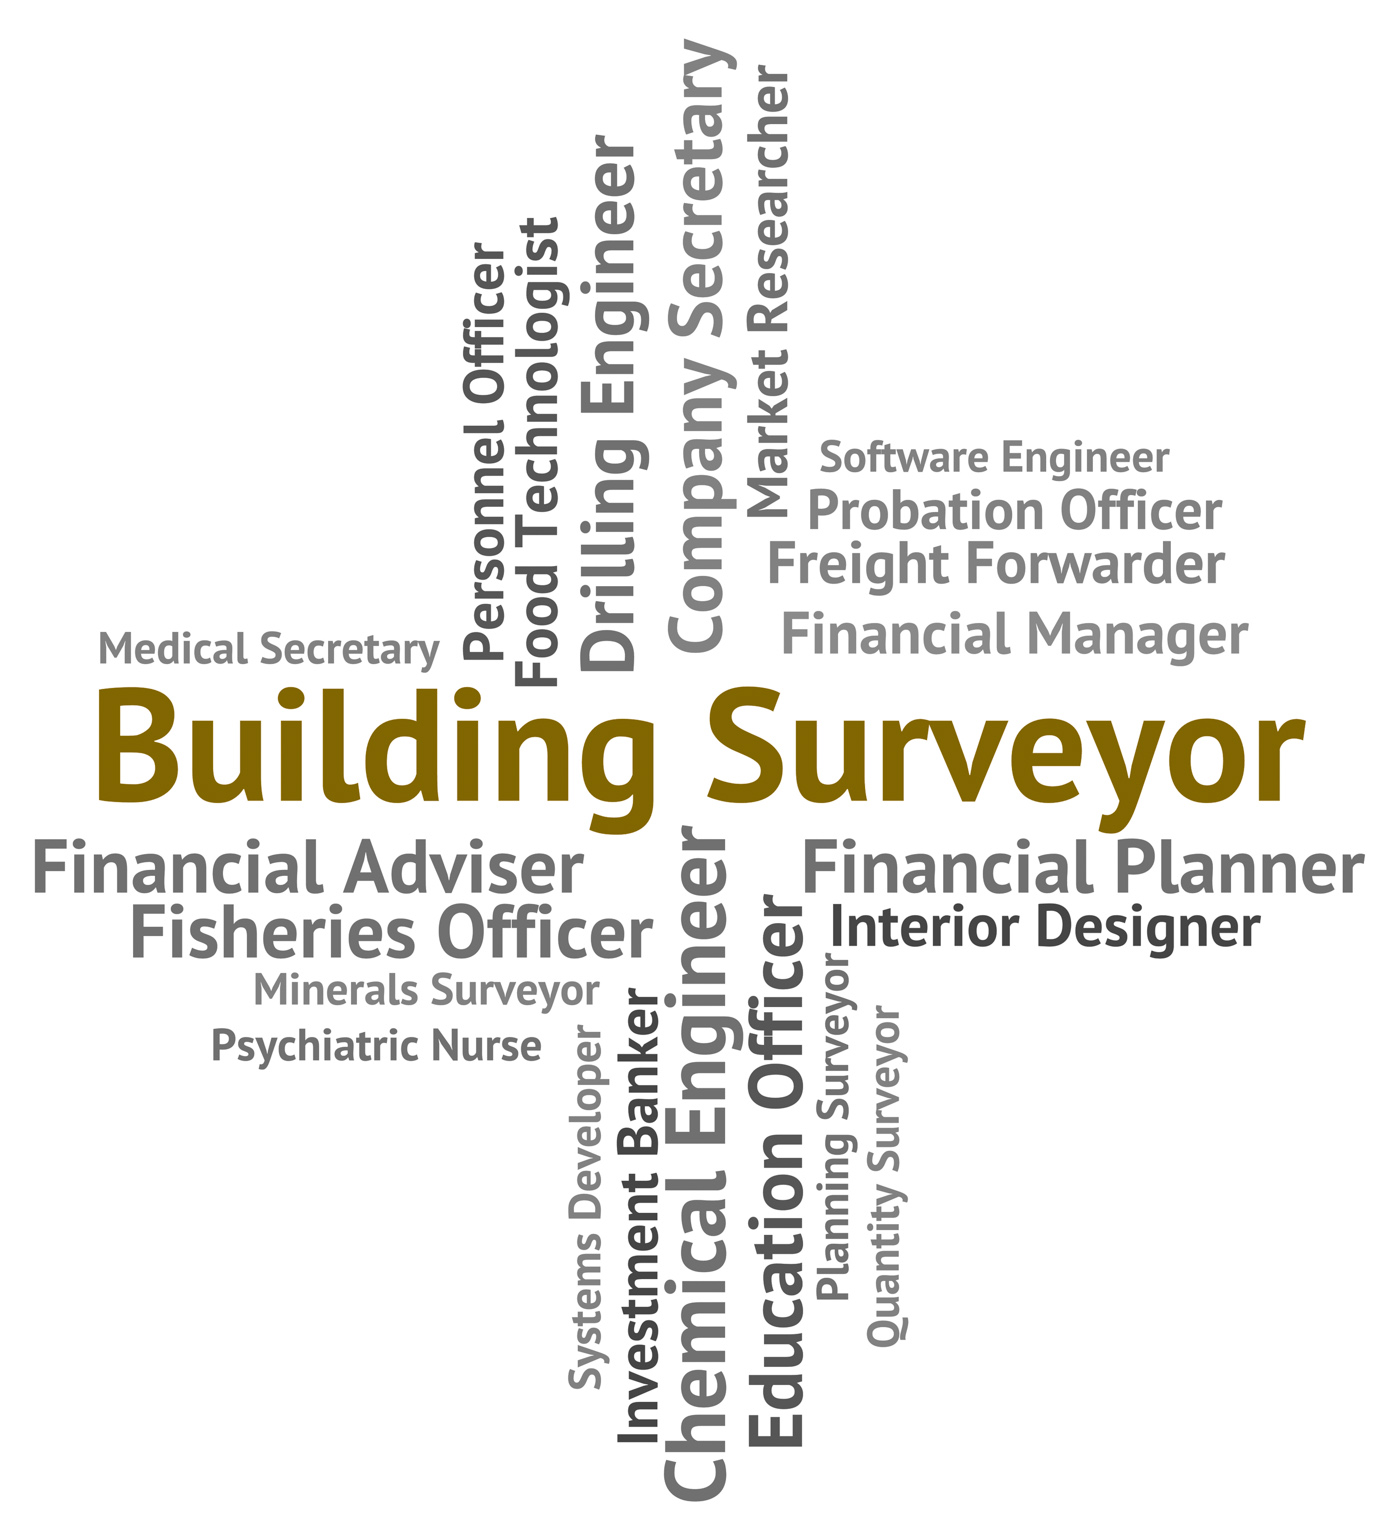 Building surveyor means houses measurer and career photo